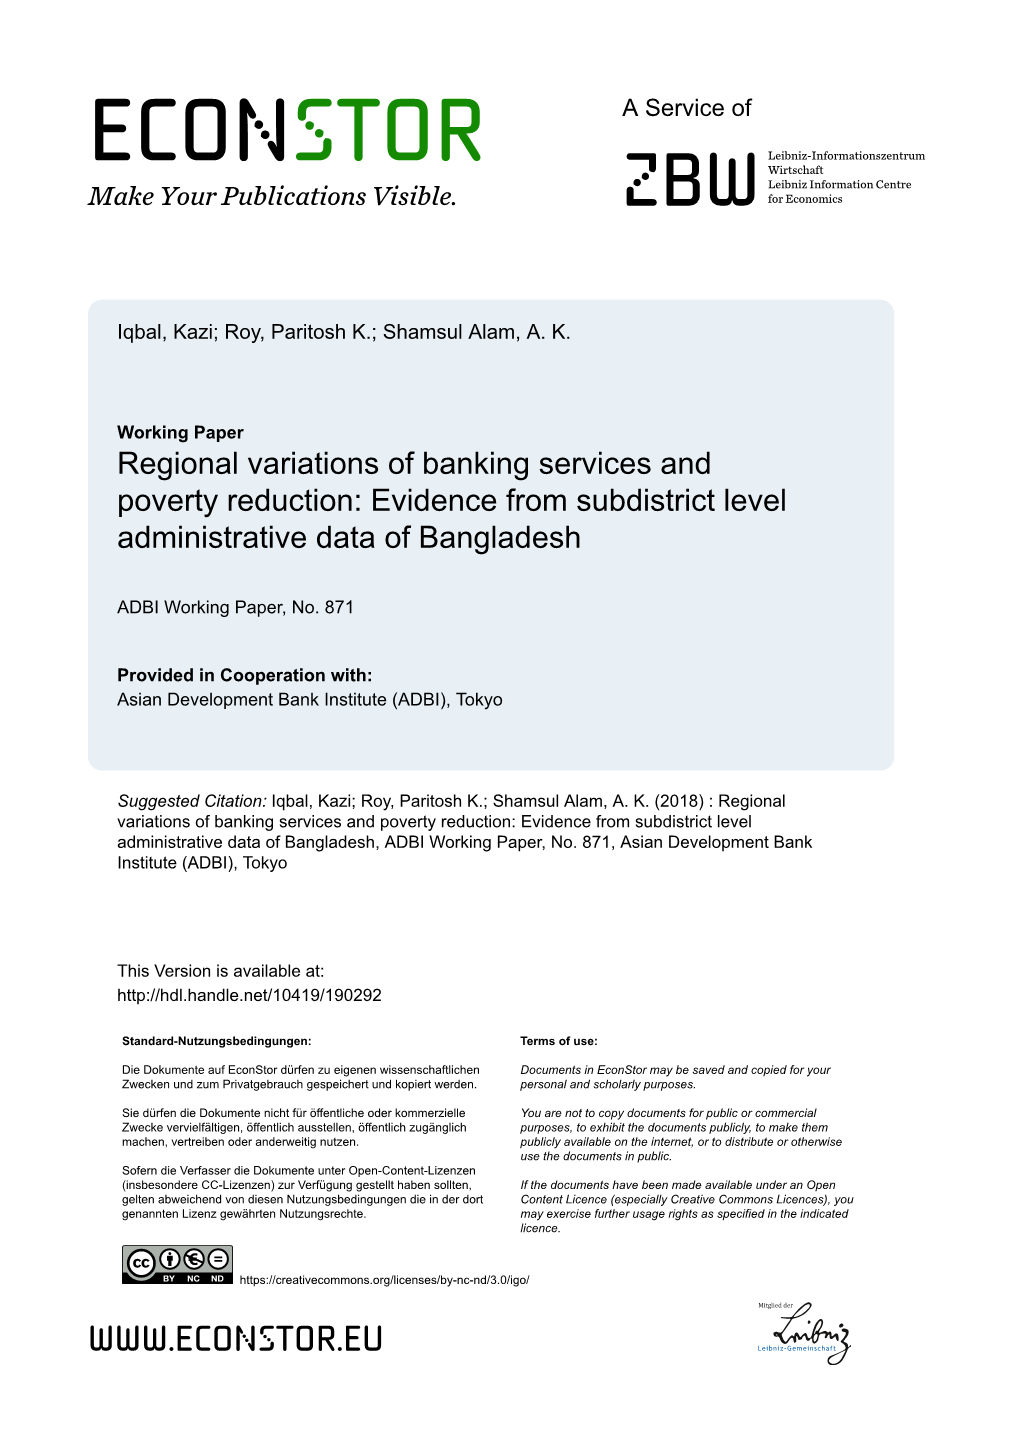 Regional Variations of Banking Services and Poverty Reduction: Evidence from Subdistrict Level Administrative Data of Bangladesh